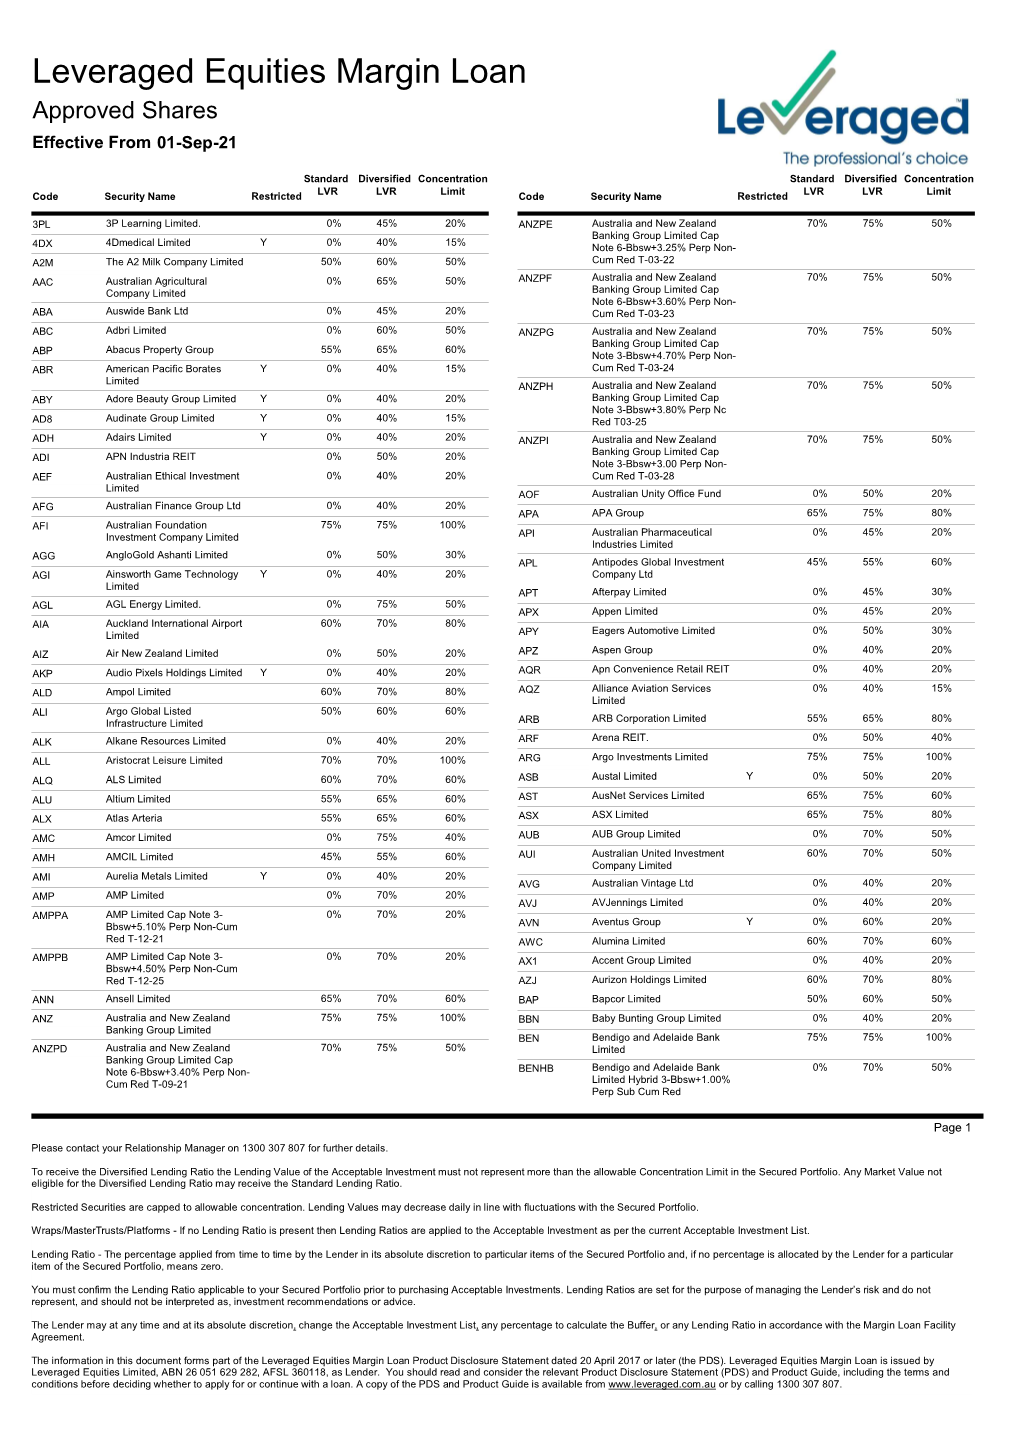 Leveraged Margin Loan Acceptable Investment List